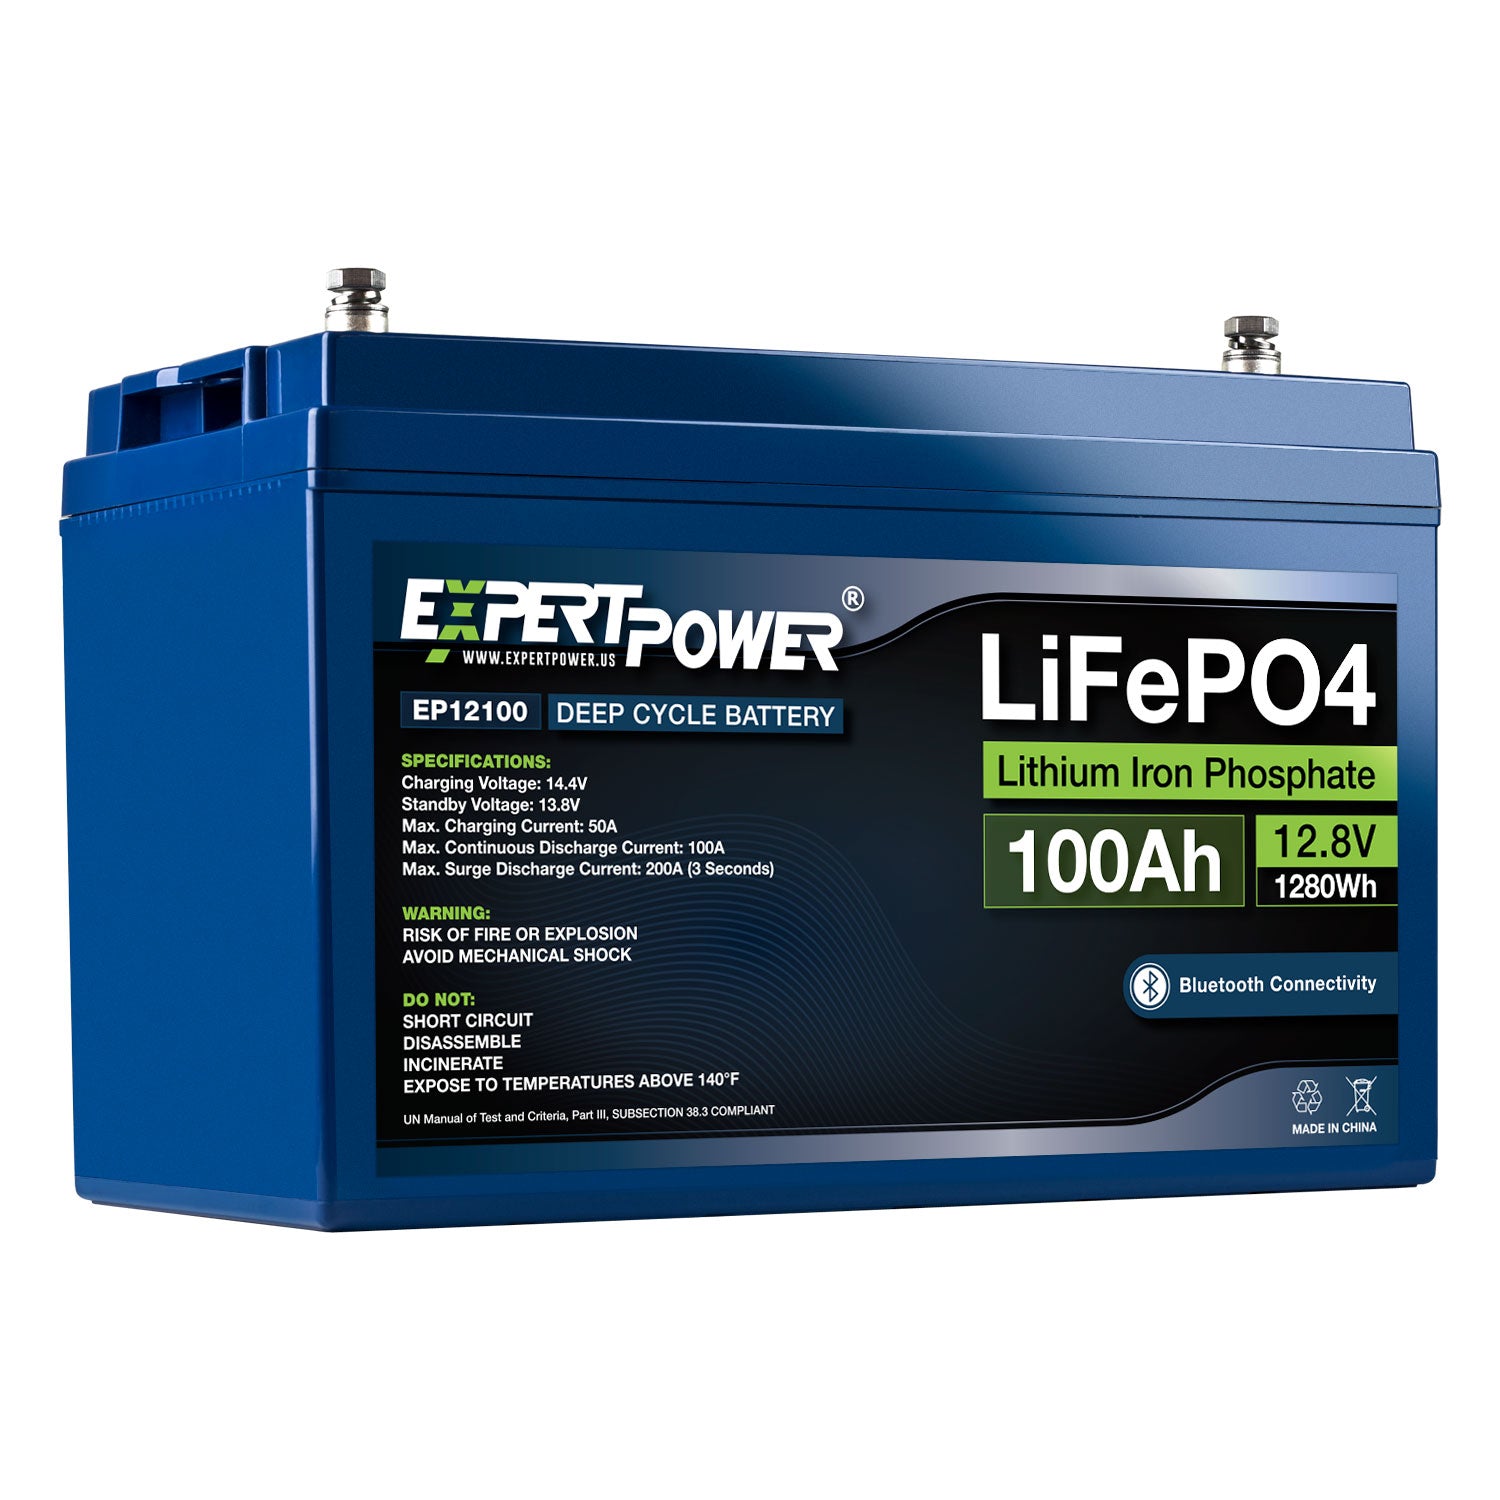 Btrpower 12V 100AH Lithium Battery Deep Cycle LiFePO4 Battery for